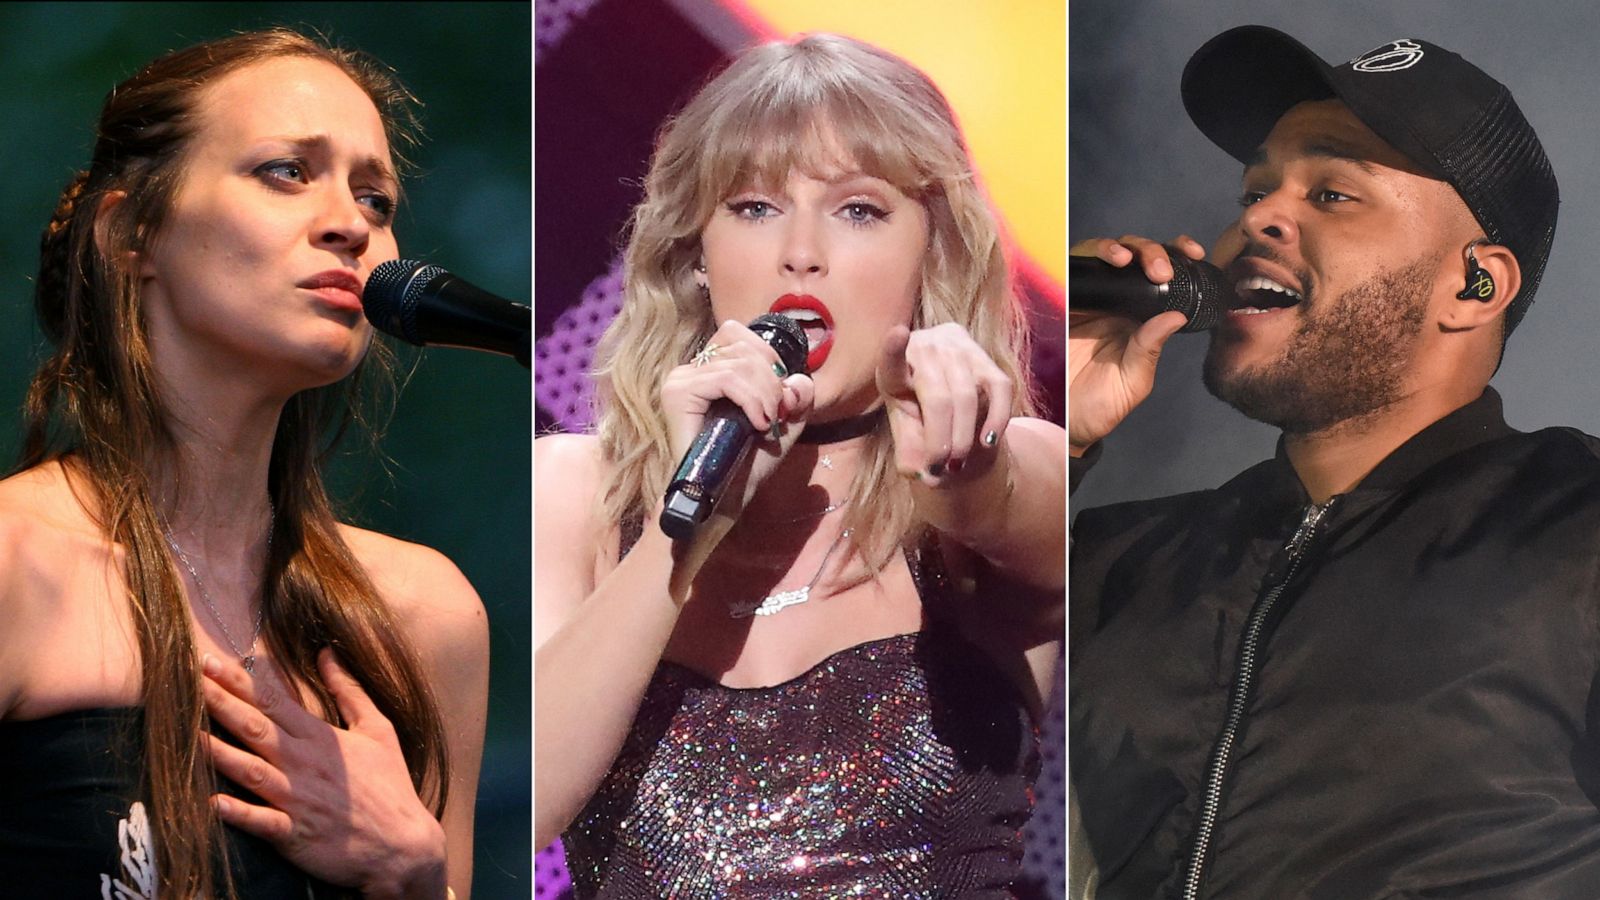 Grammy Awards: Pharrell Williams, Madonna and Sia Offered Hymns